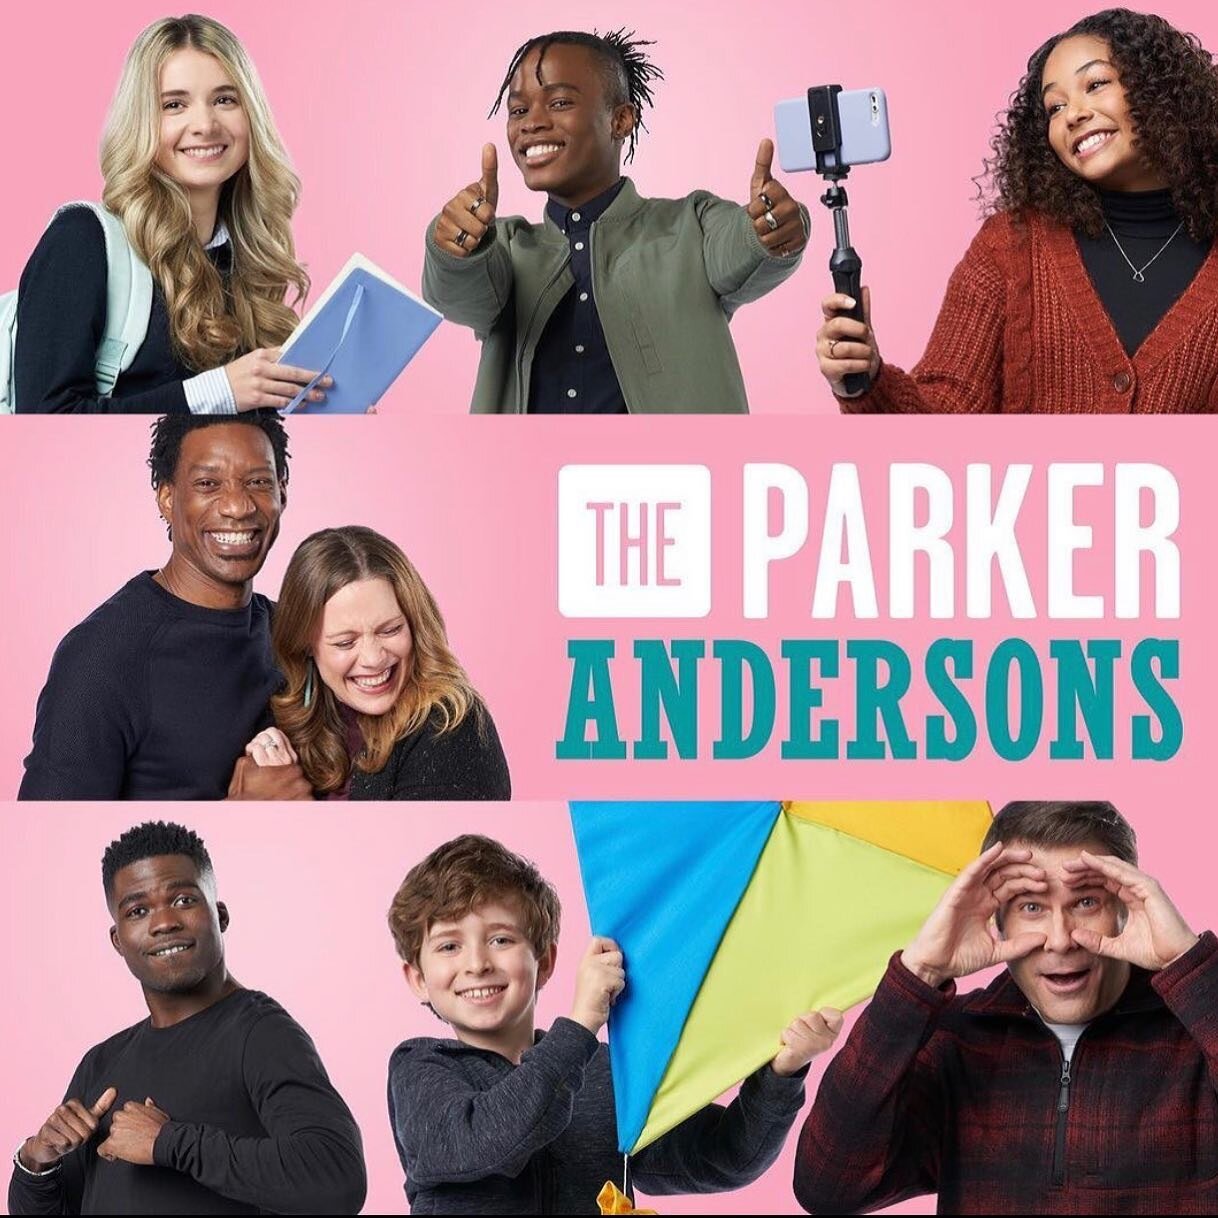 An all new episode of #TheParkerAndersons and #AmeliaParker is out tonight, 8 &amp; 8:30pm on @schearthome and 7 &amp; 7:30pm on @byutv! ⁣✨💕
⁣
We love, love, love these shows, and know you will too! ⁣
⁣
@marblemediaofficial #cdnproduction #cdntv #bi